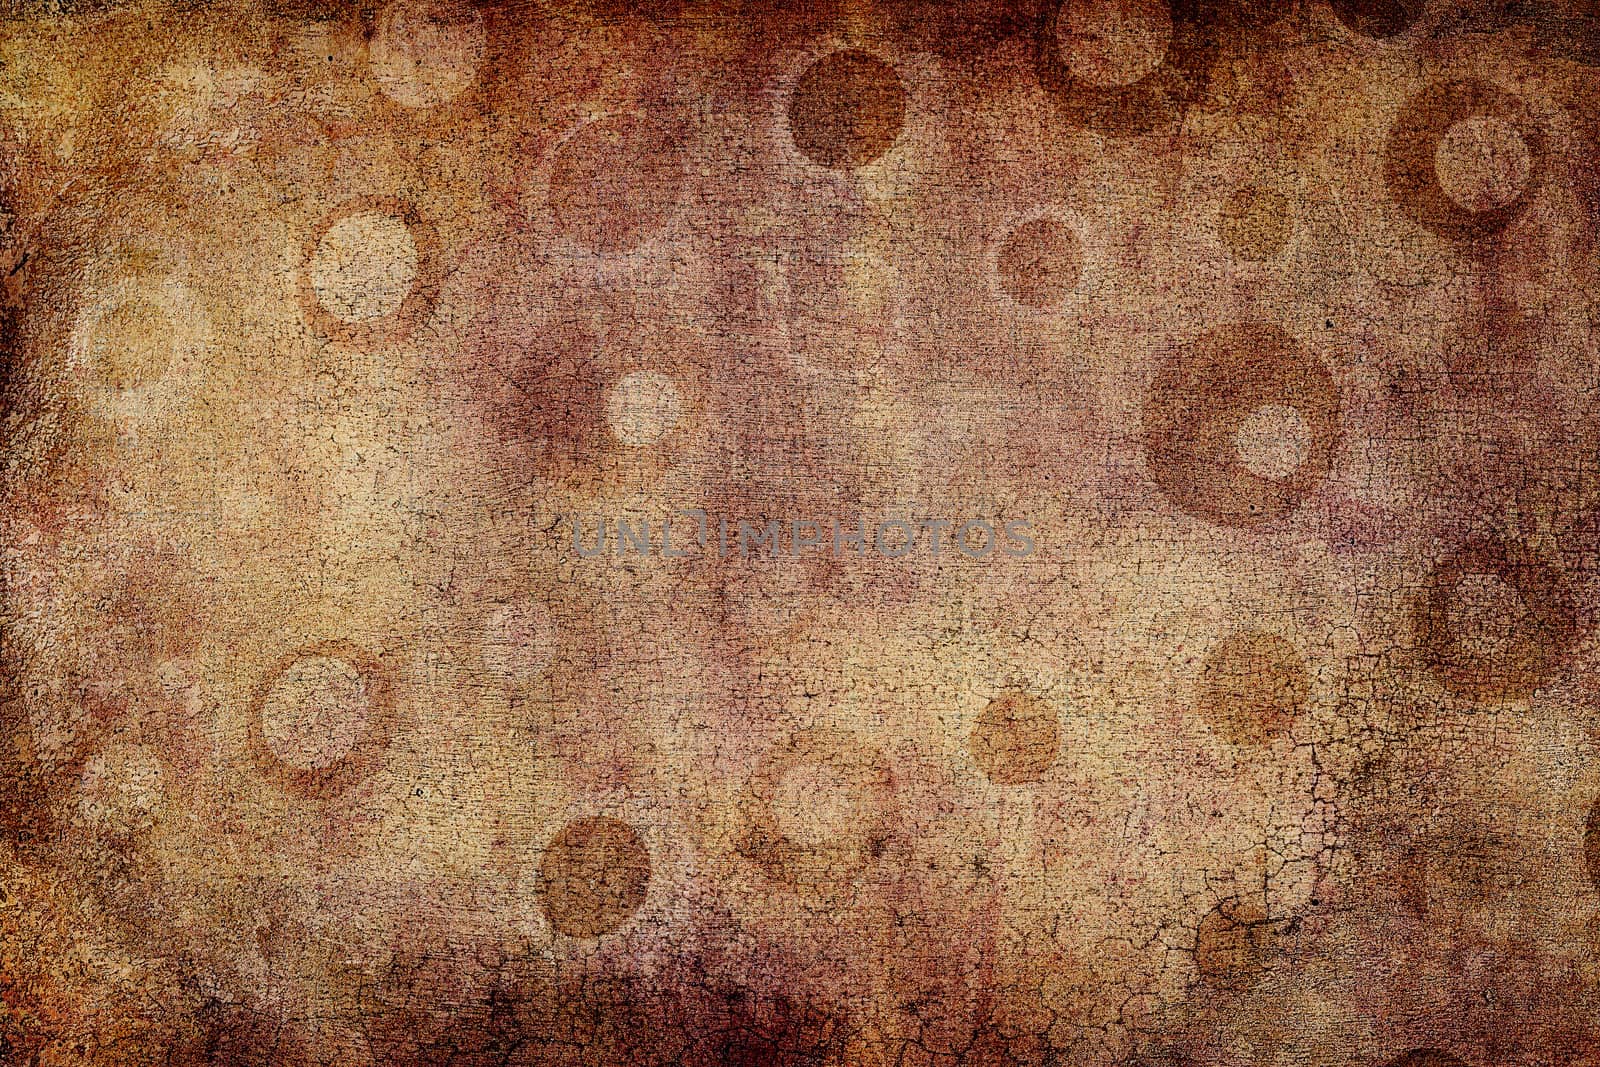 Texture background made of  brown dots, or circles, with craquelures